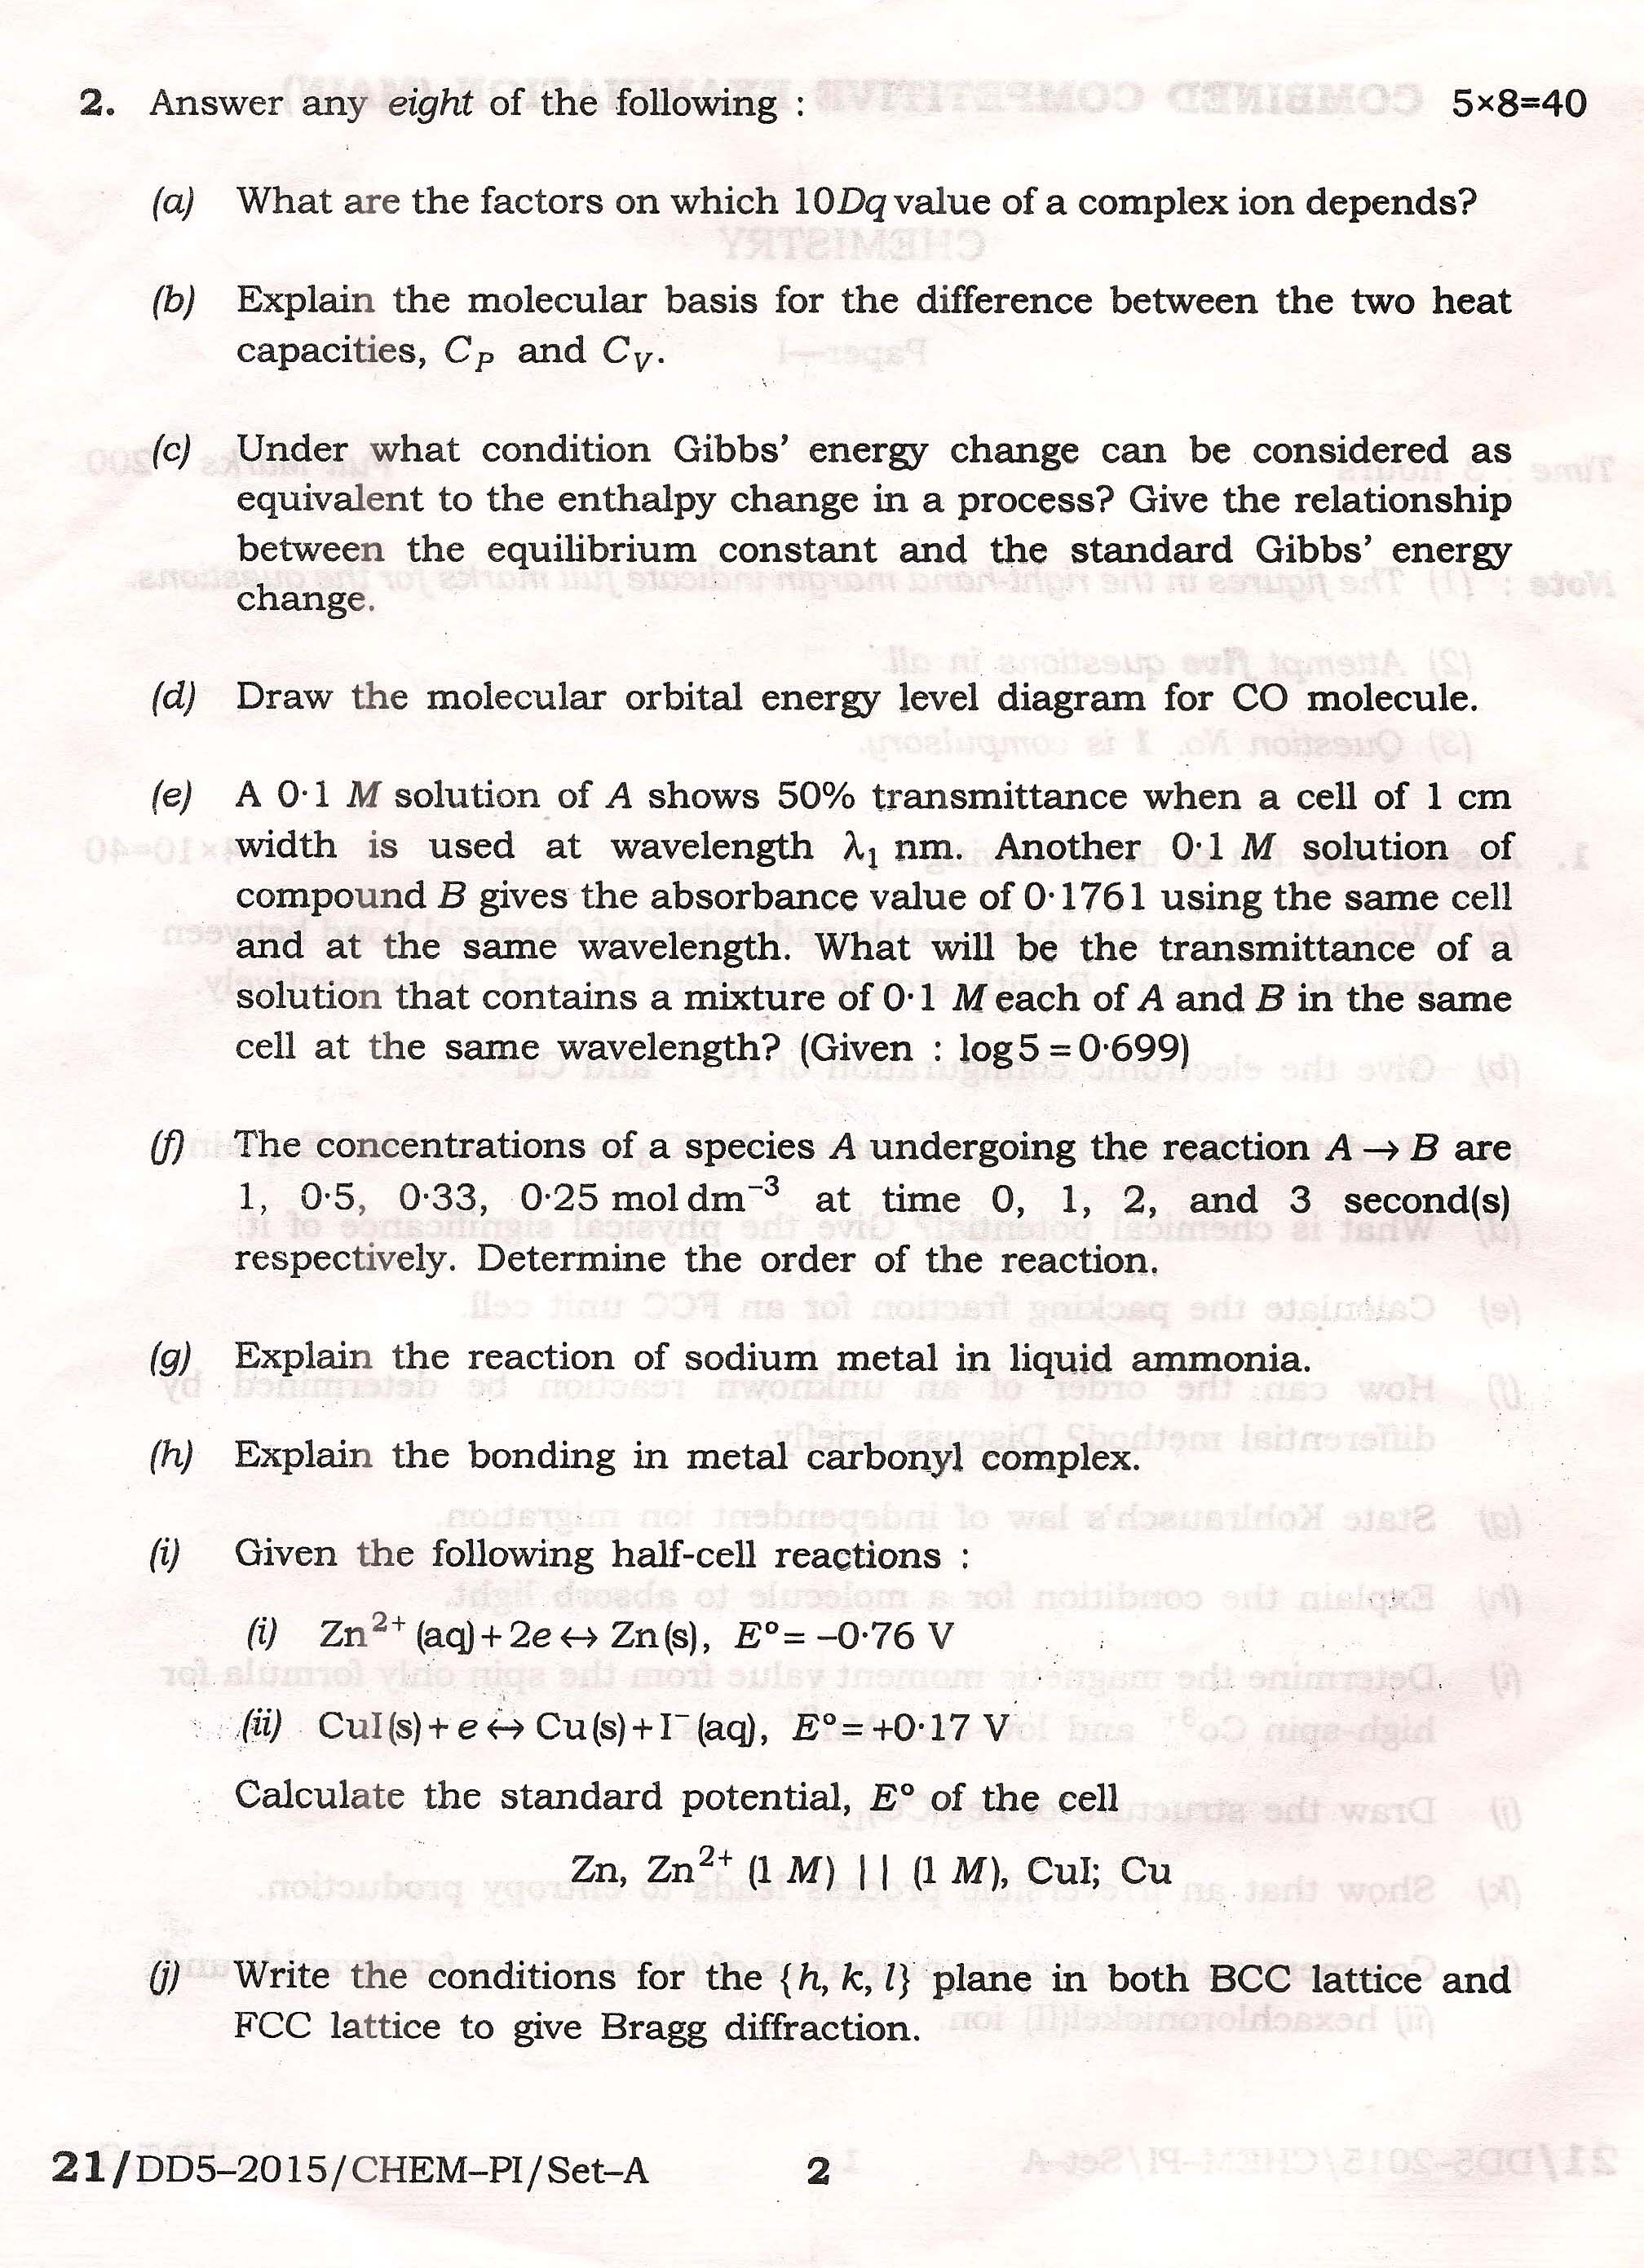 APPSC Combined Competitive Main Exam 2015 Chemistry Paper I 2